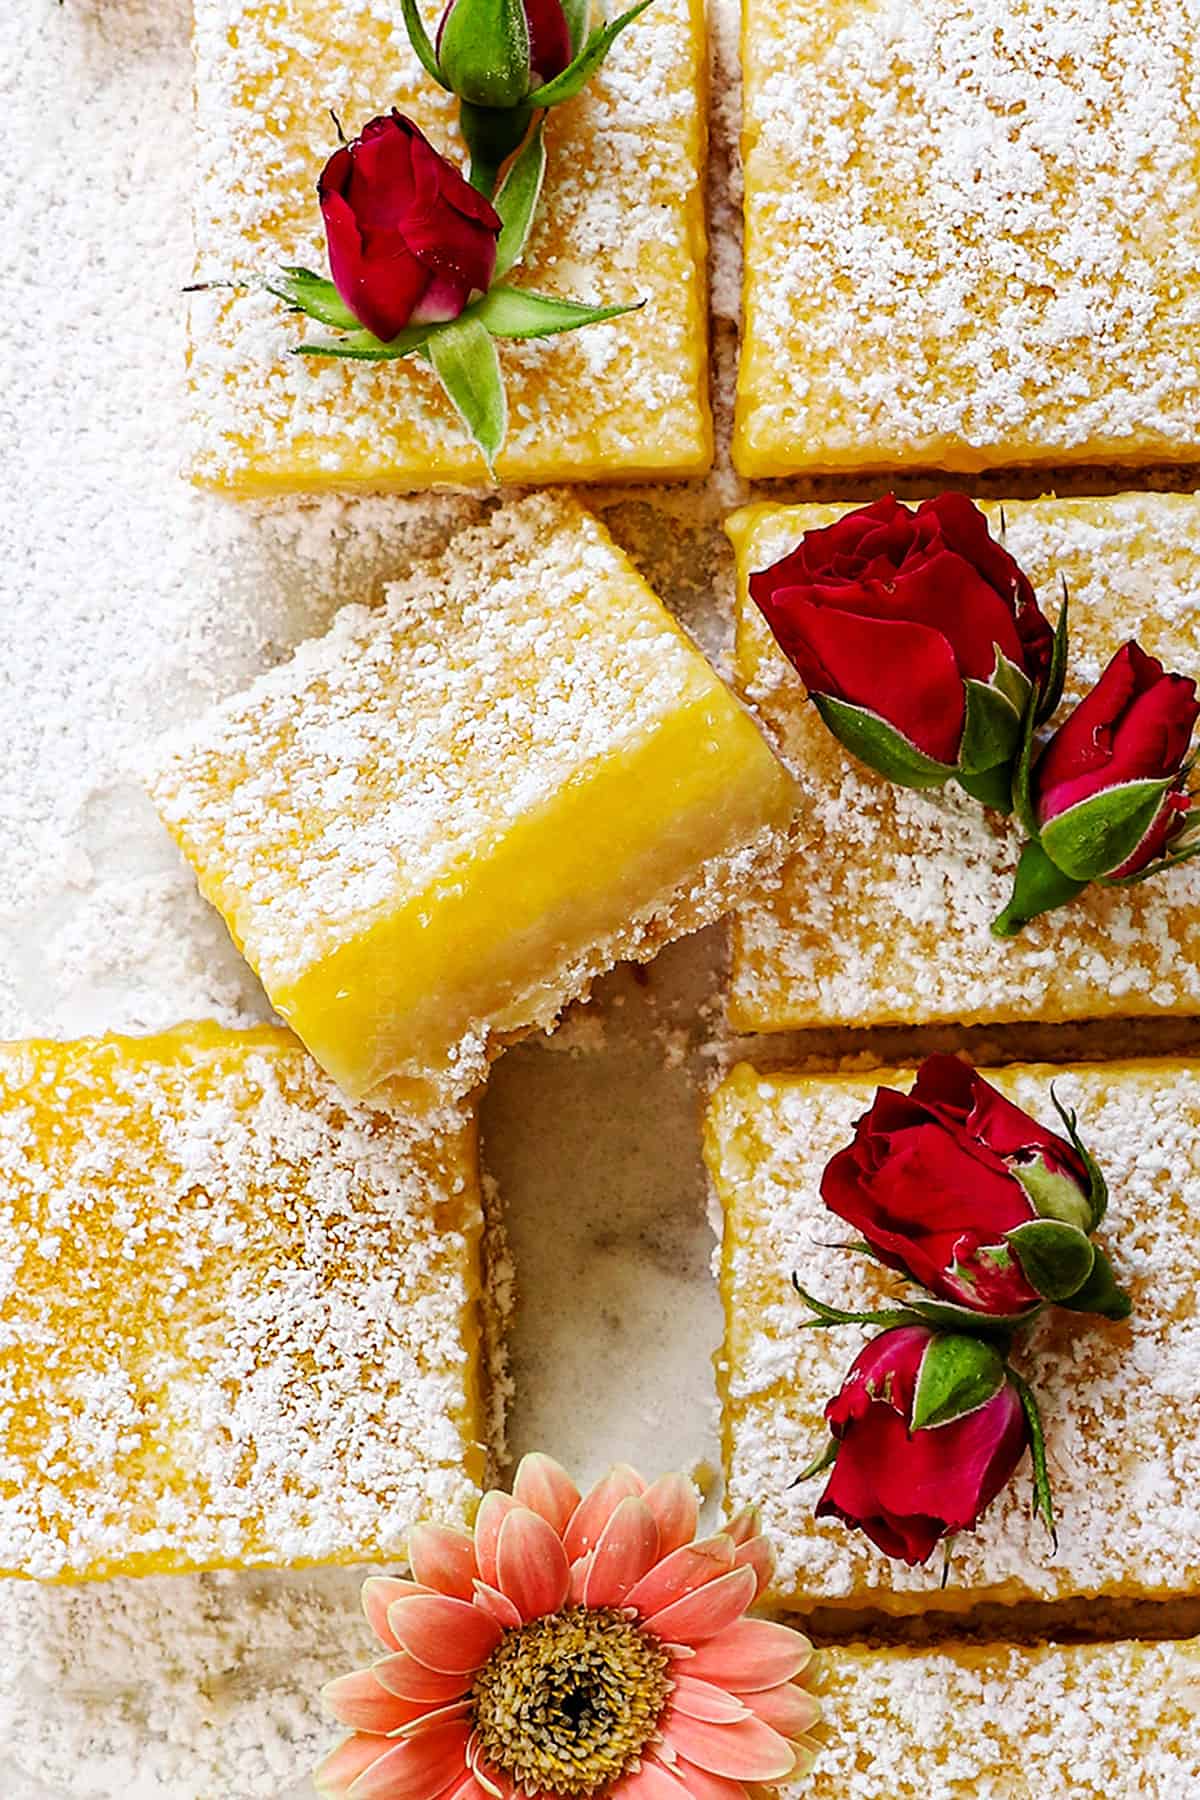 showing how to make lemon bars recipe by cutting into squares and dusting with powdered sugar